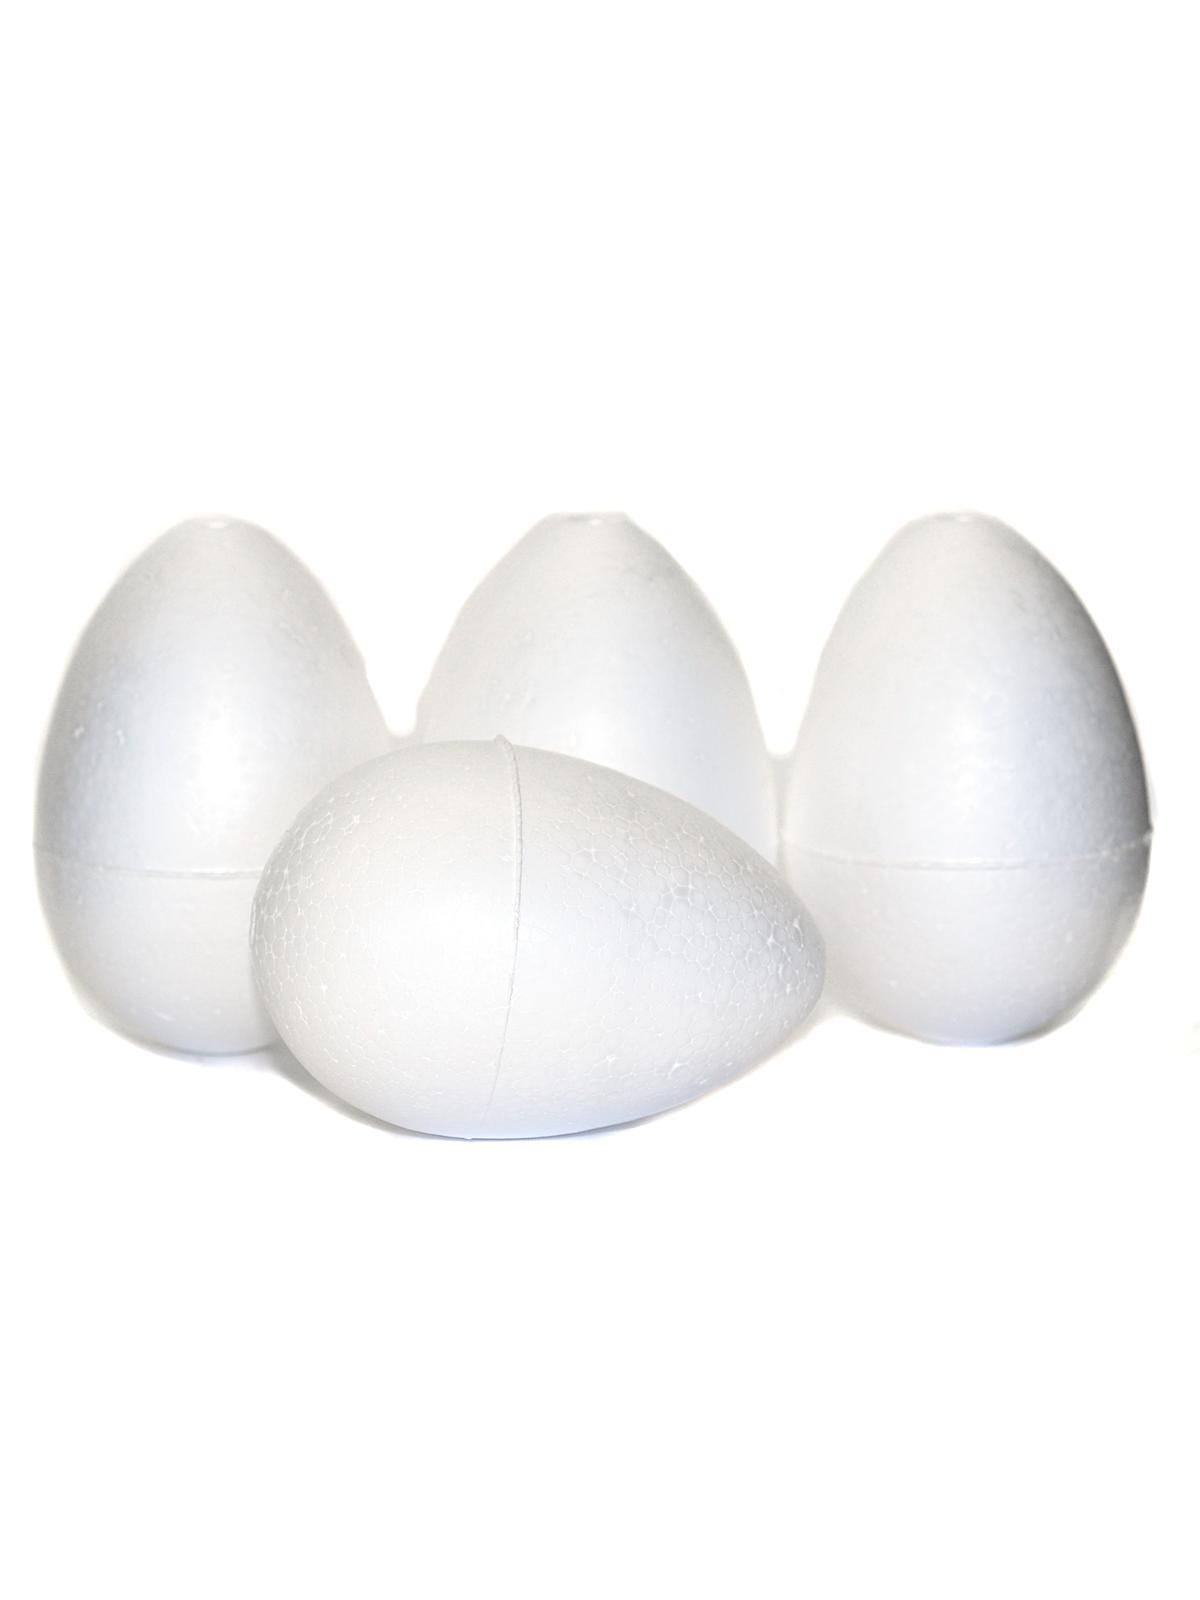 Craft Foam Shapes Egg 3 In. Pack Of 4